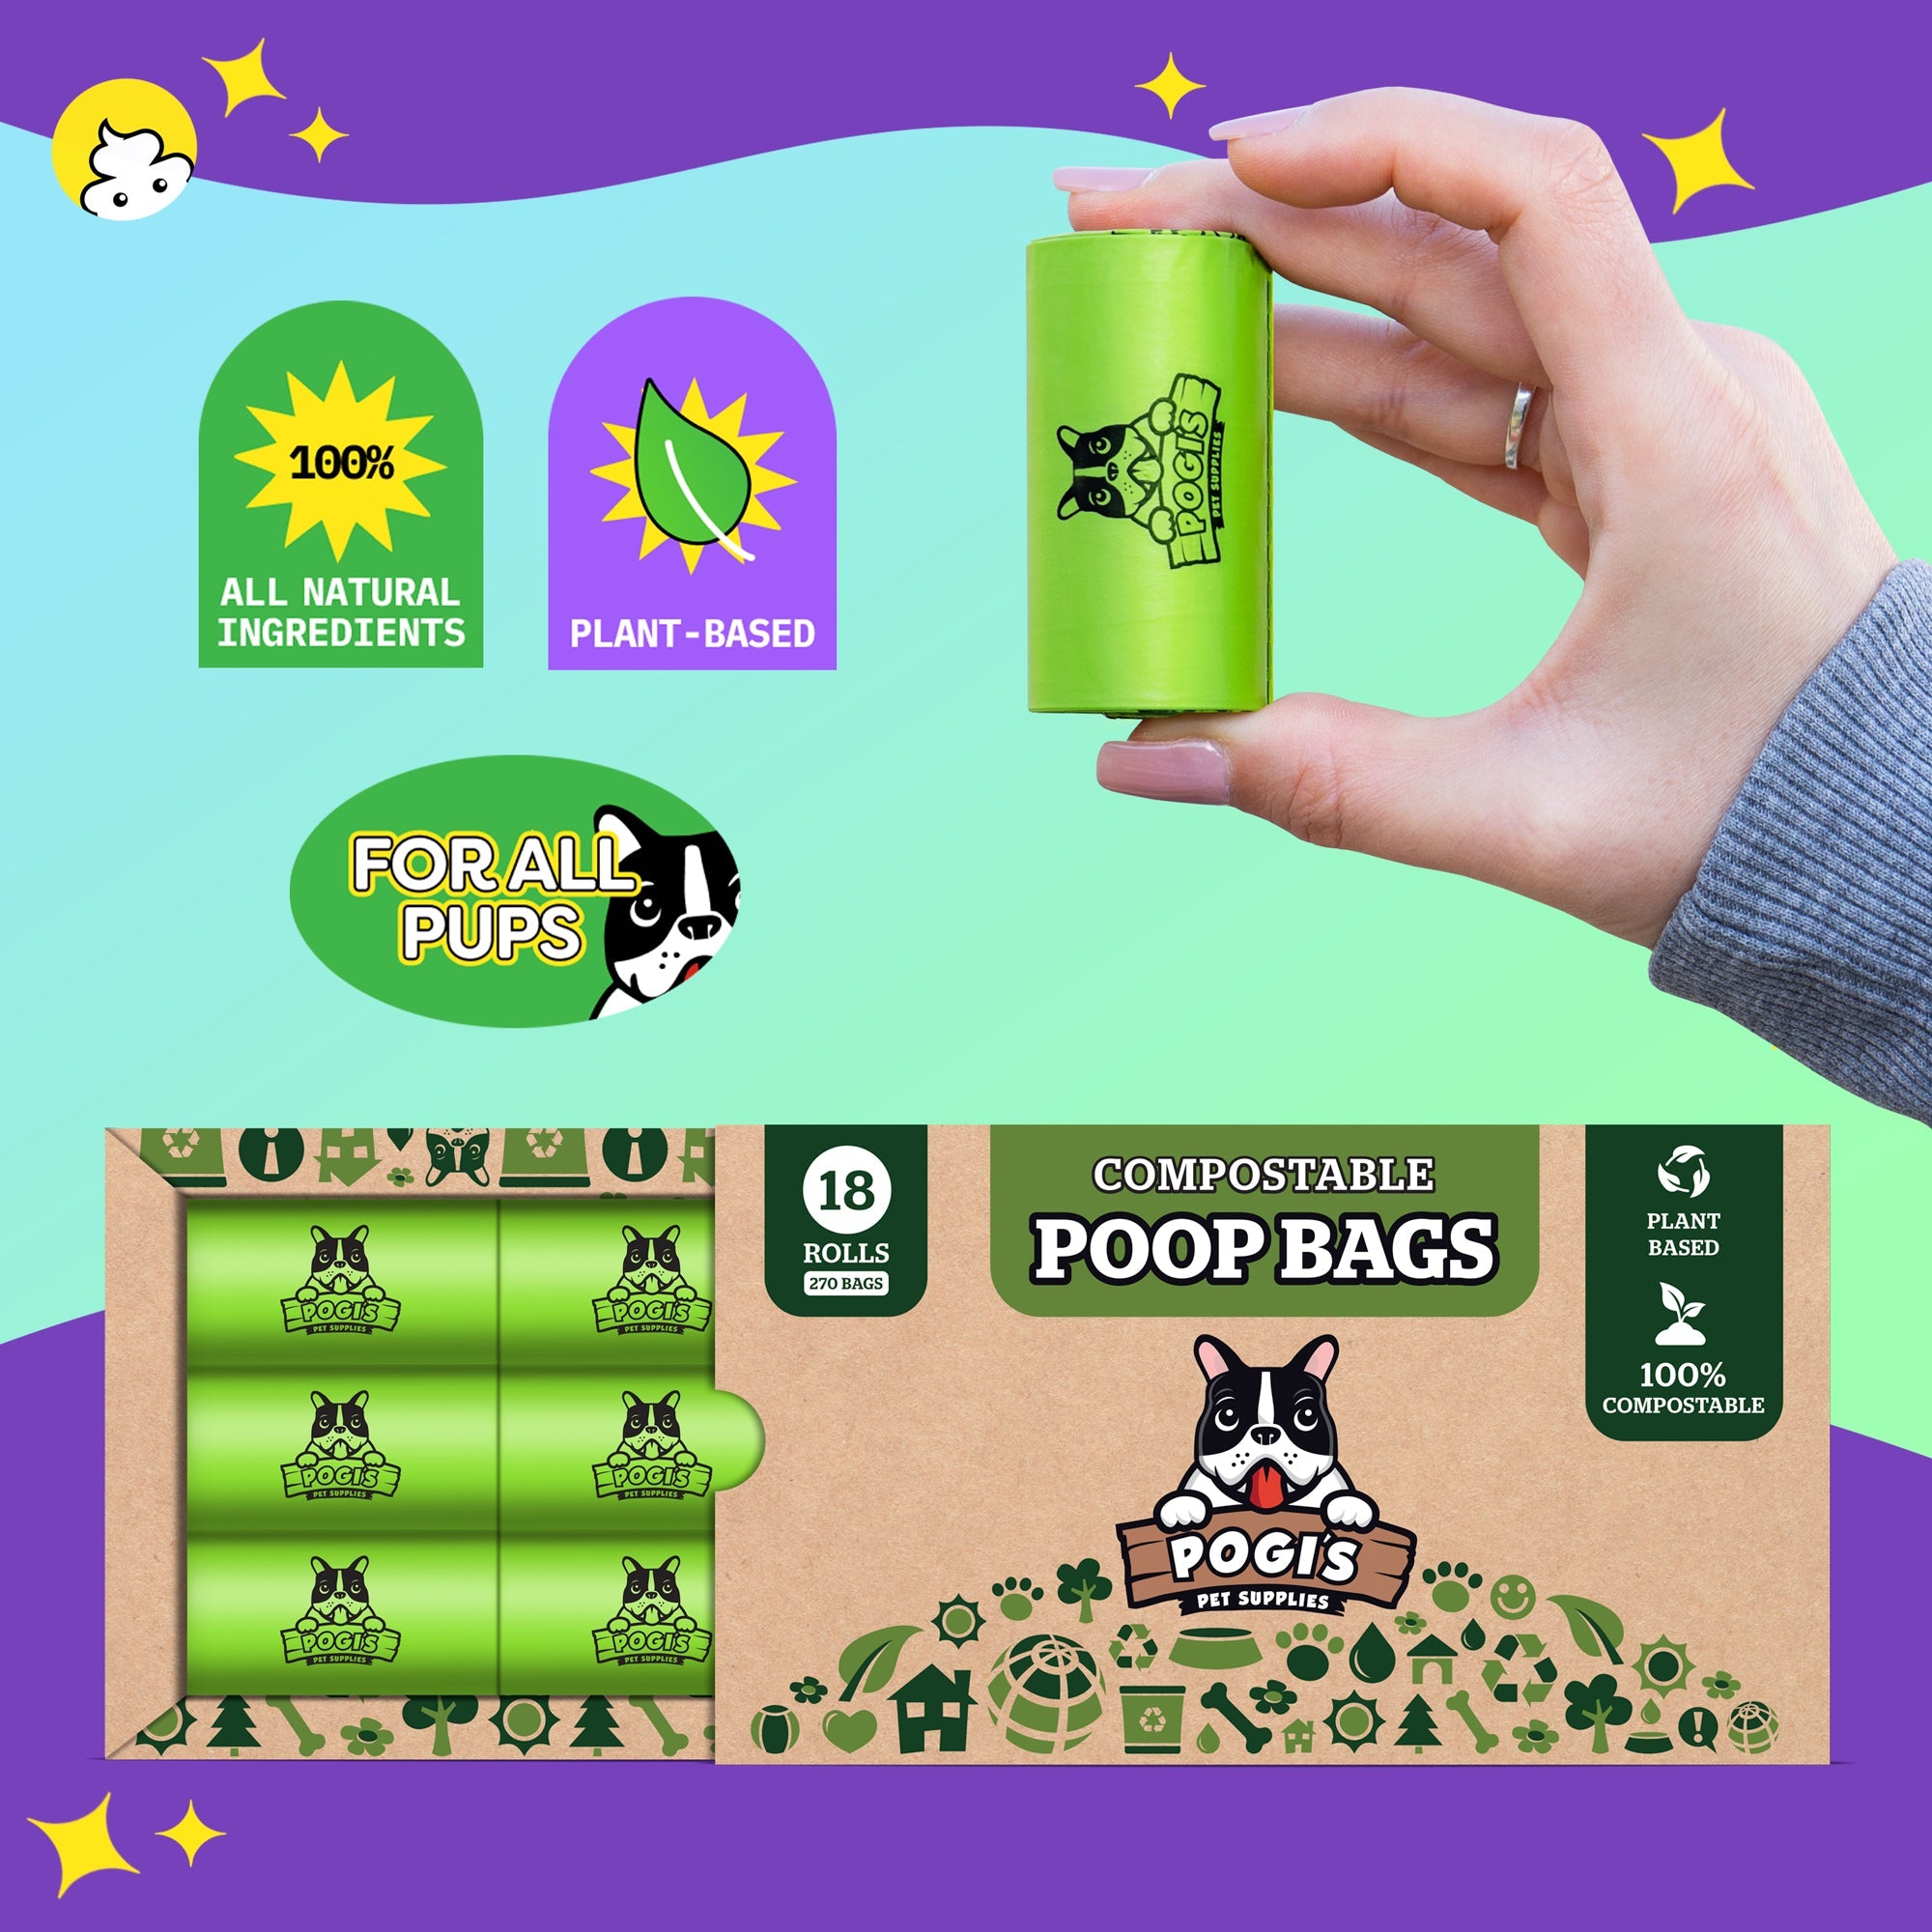 Amazon.com: Pawtopia Certified Home Compostable Dog Poop Bags (60 Bags), Biodegradable  Poop Bags, Cat Litter, Vegetable Starches, Eco-friendly Dog Waste Bags,  Leak proof, Easy to Open, Give Back : Pet Supplies